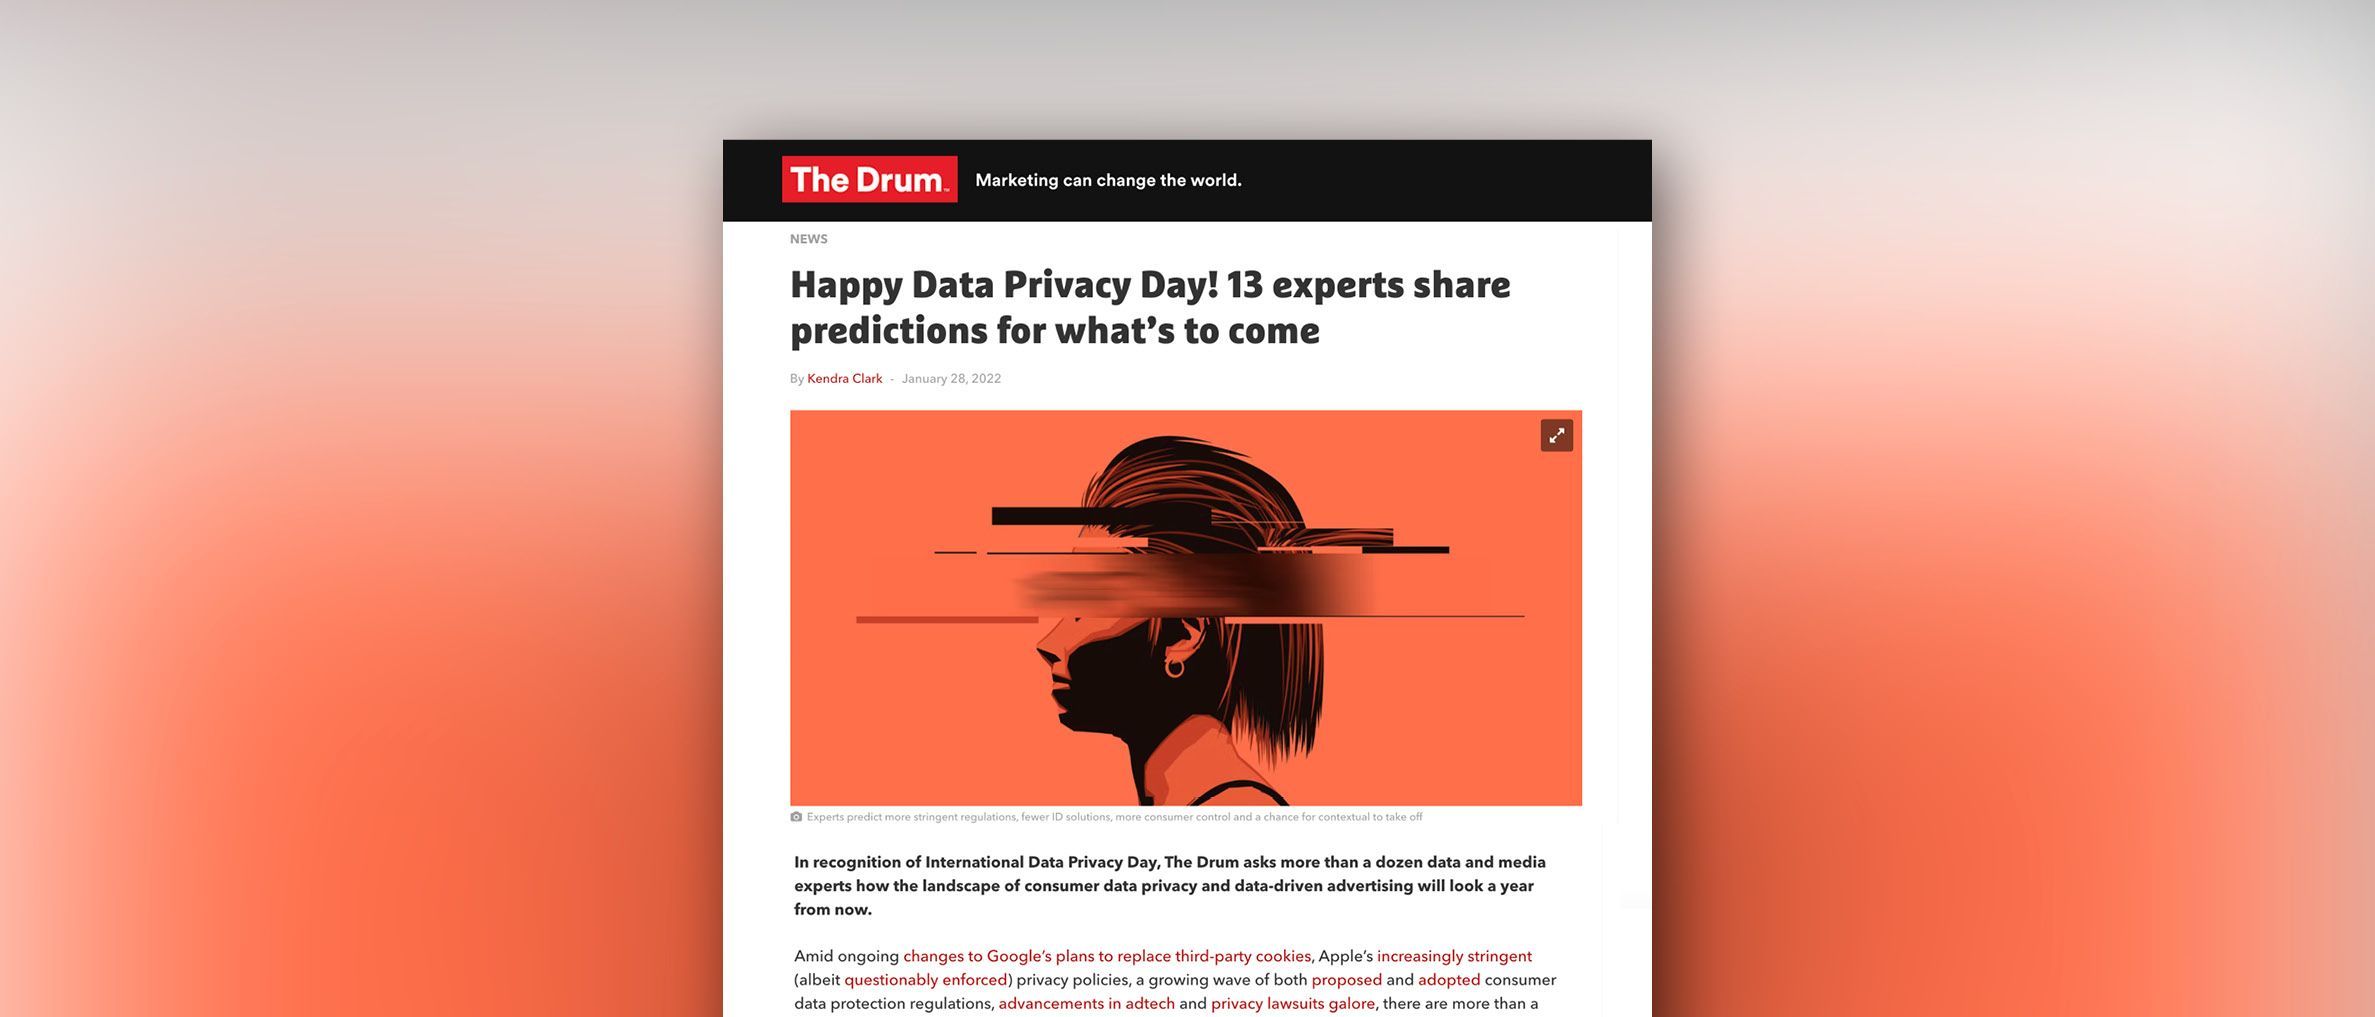 The Drum: Happy Data Privacy Day! 13 Experts Share Predictions For What’s To Come